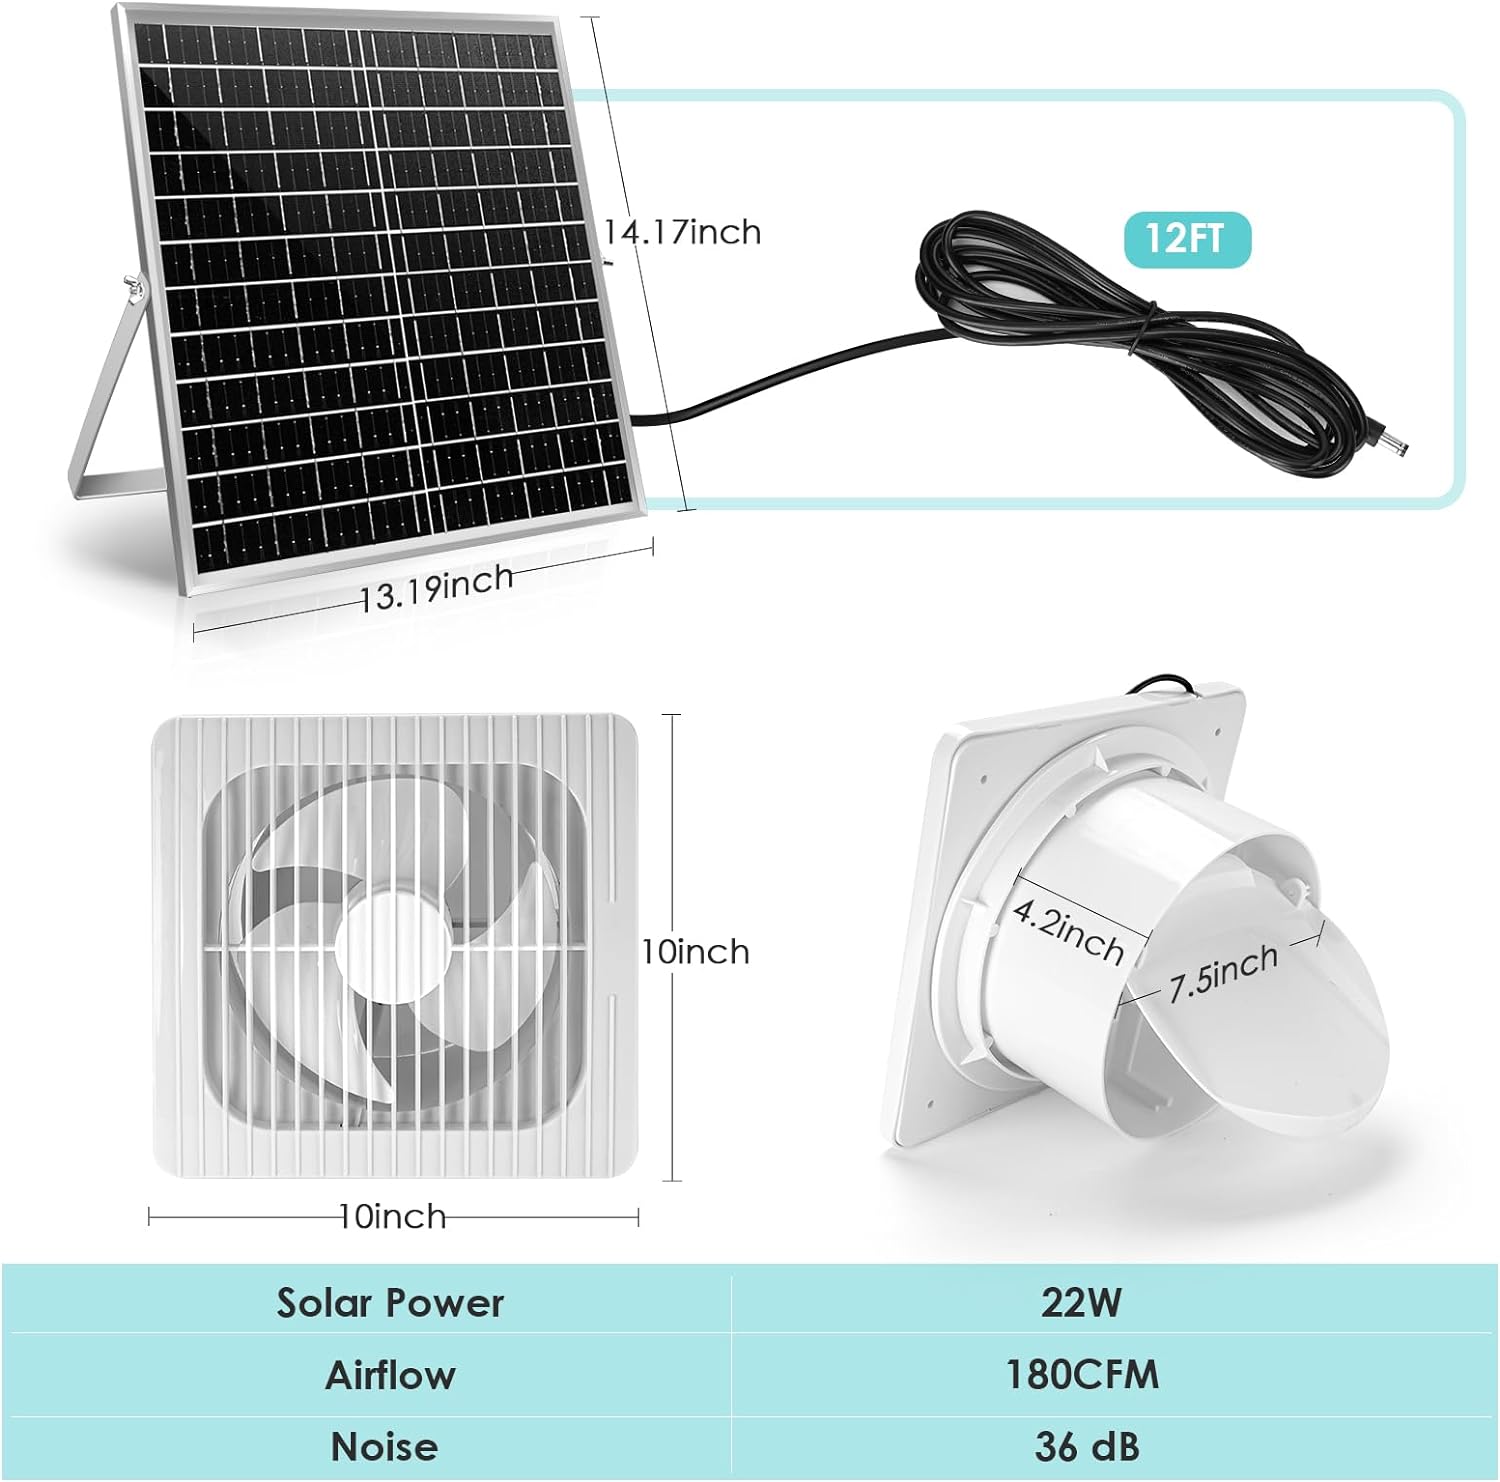 solar powered exhaust fan 22w solar panel with 8 solar brushless fan for outside shed ventilation greenhouse chicken coo 1